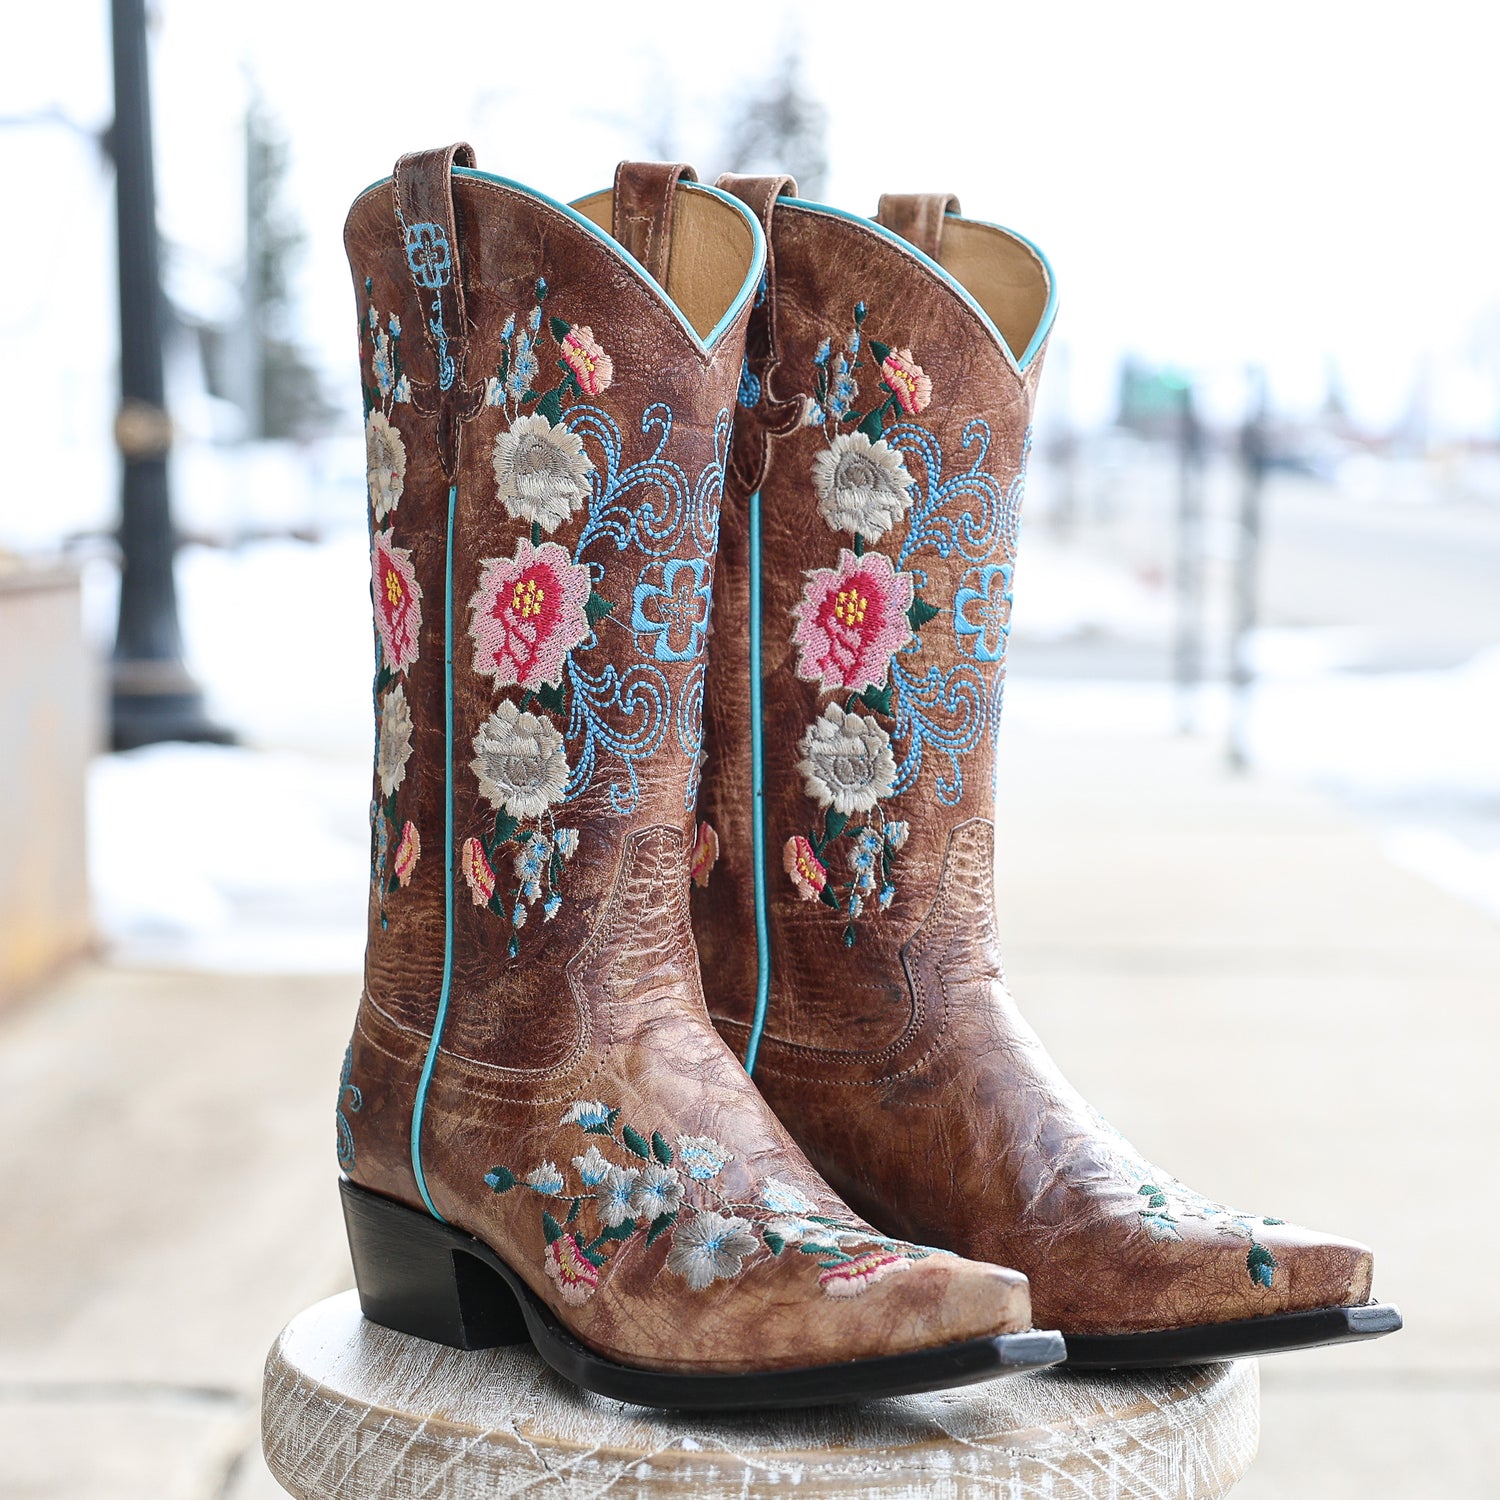 Macie Bean Never Promised You A Rose Garden Womens Boot